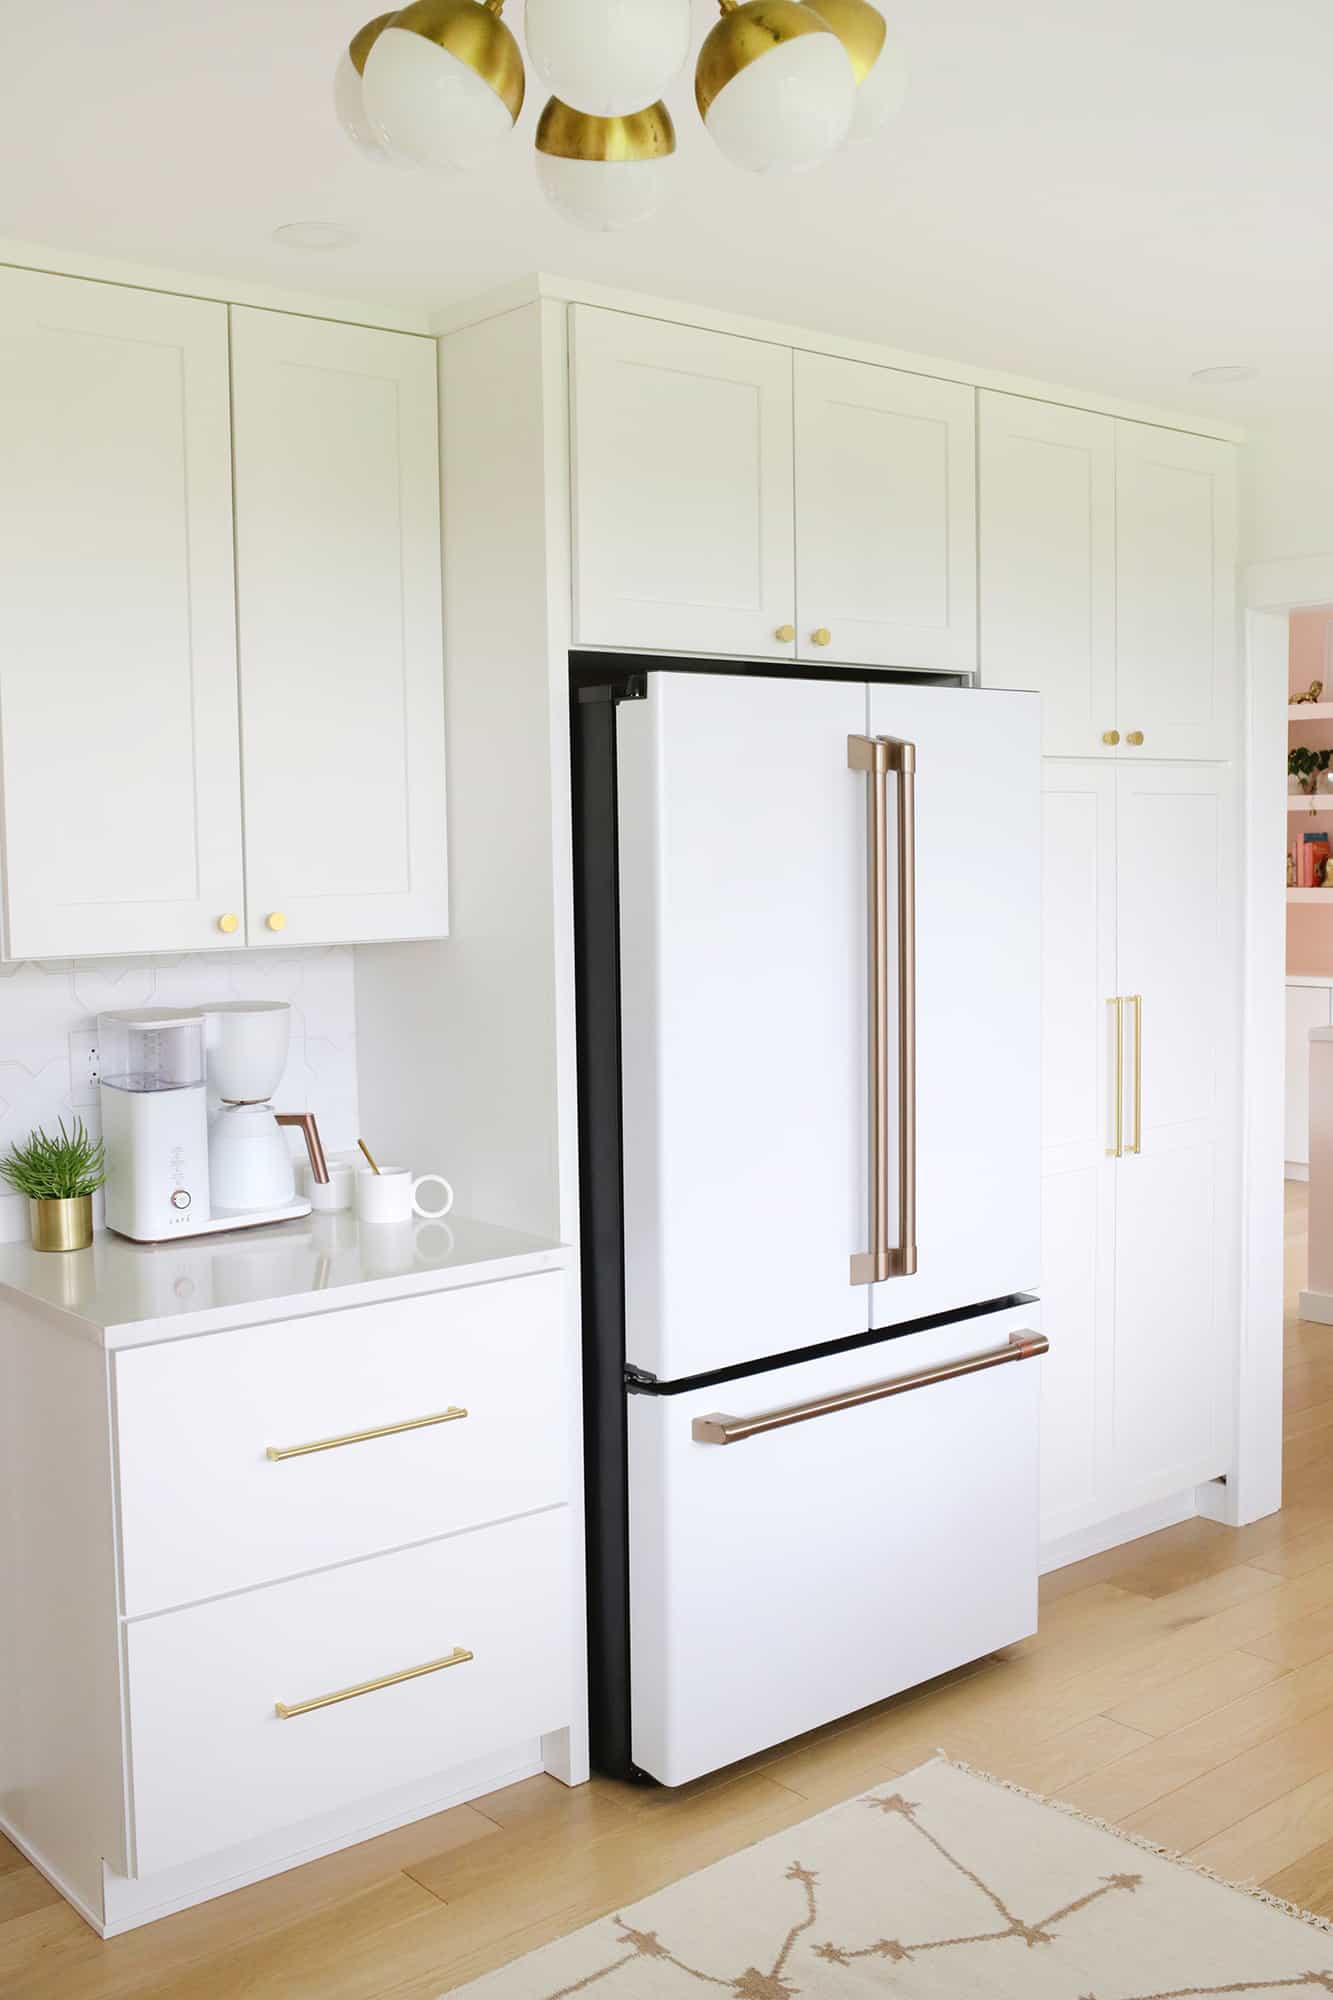 view of refrigerator with coffee maker on counter